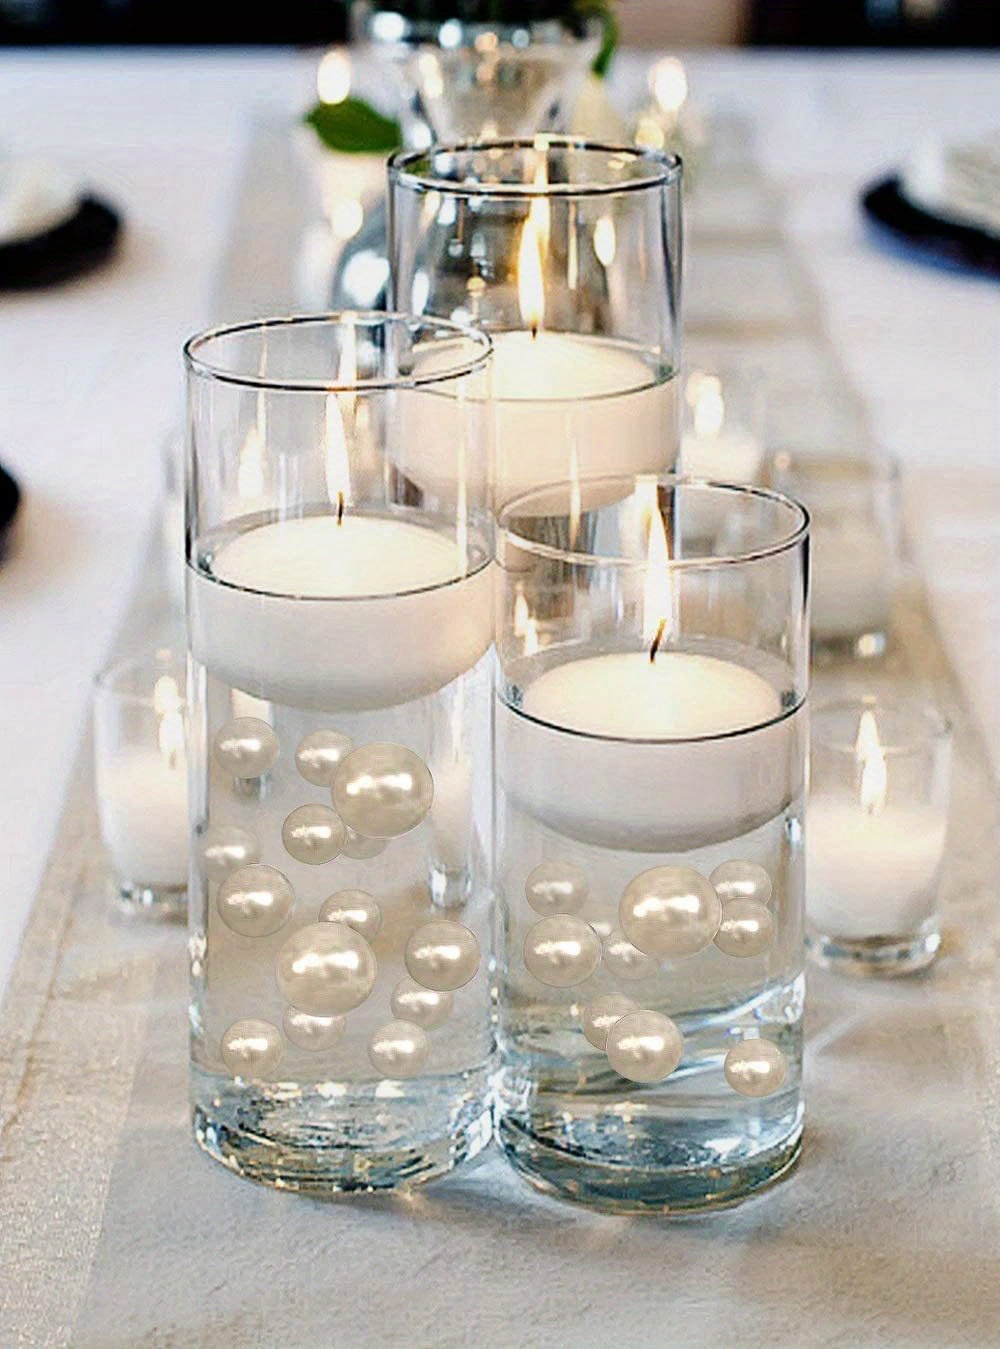 By now you may have seen this neat water bead floating candle trend fo